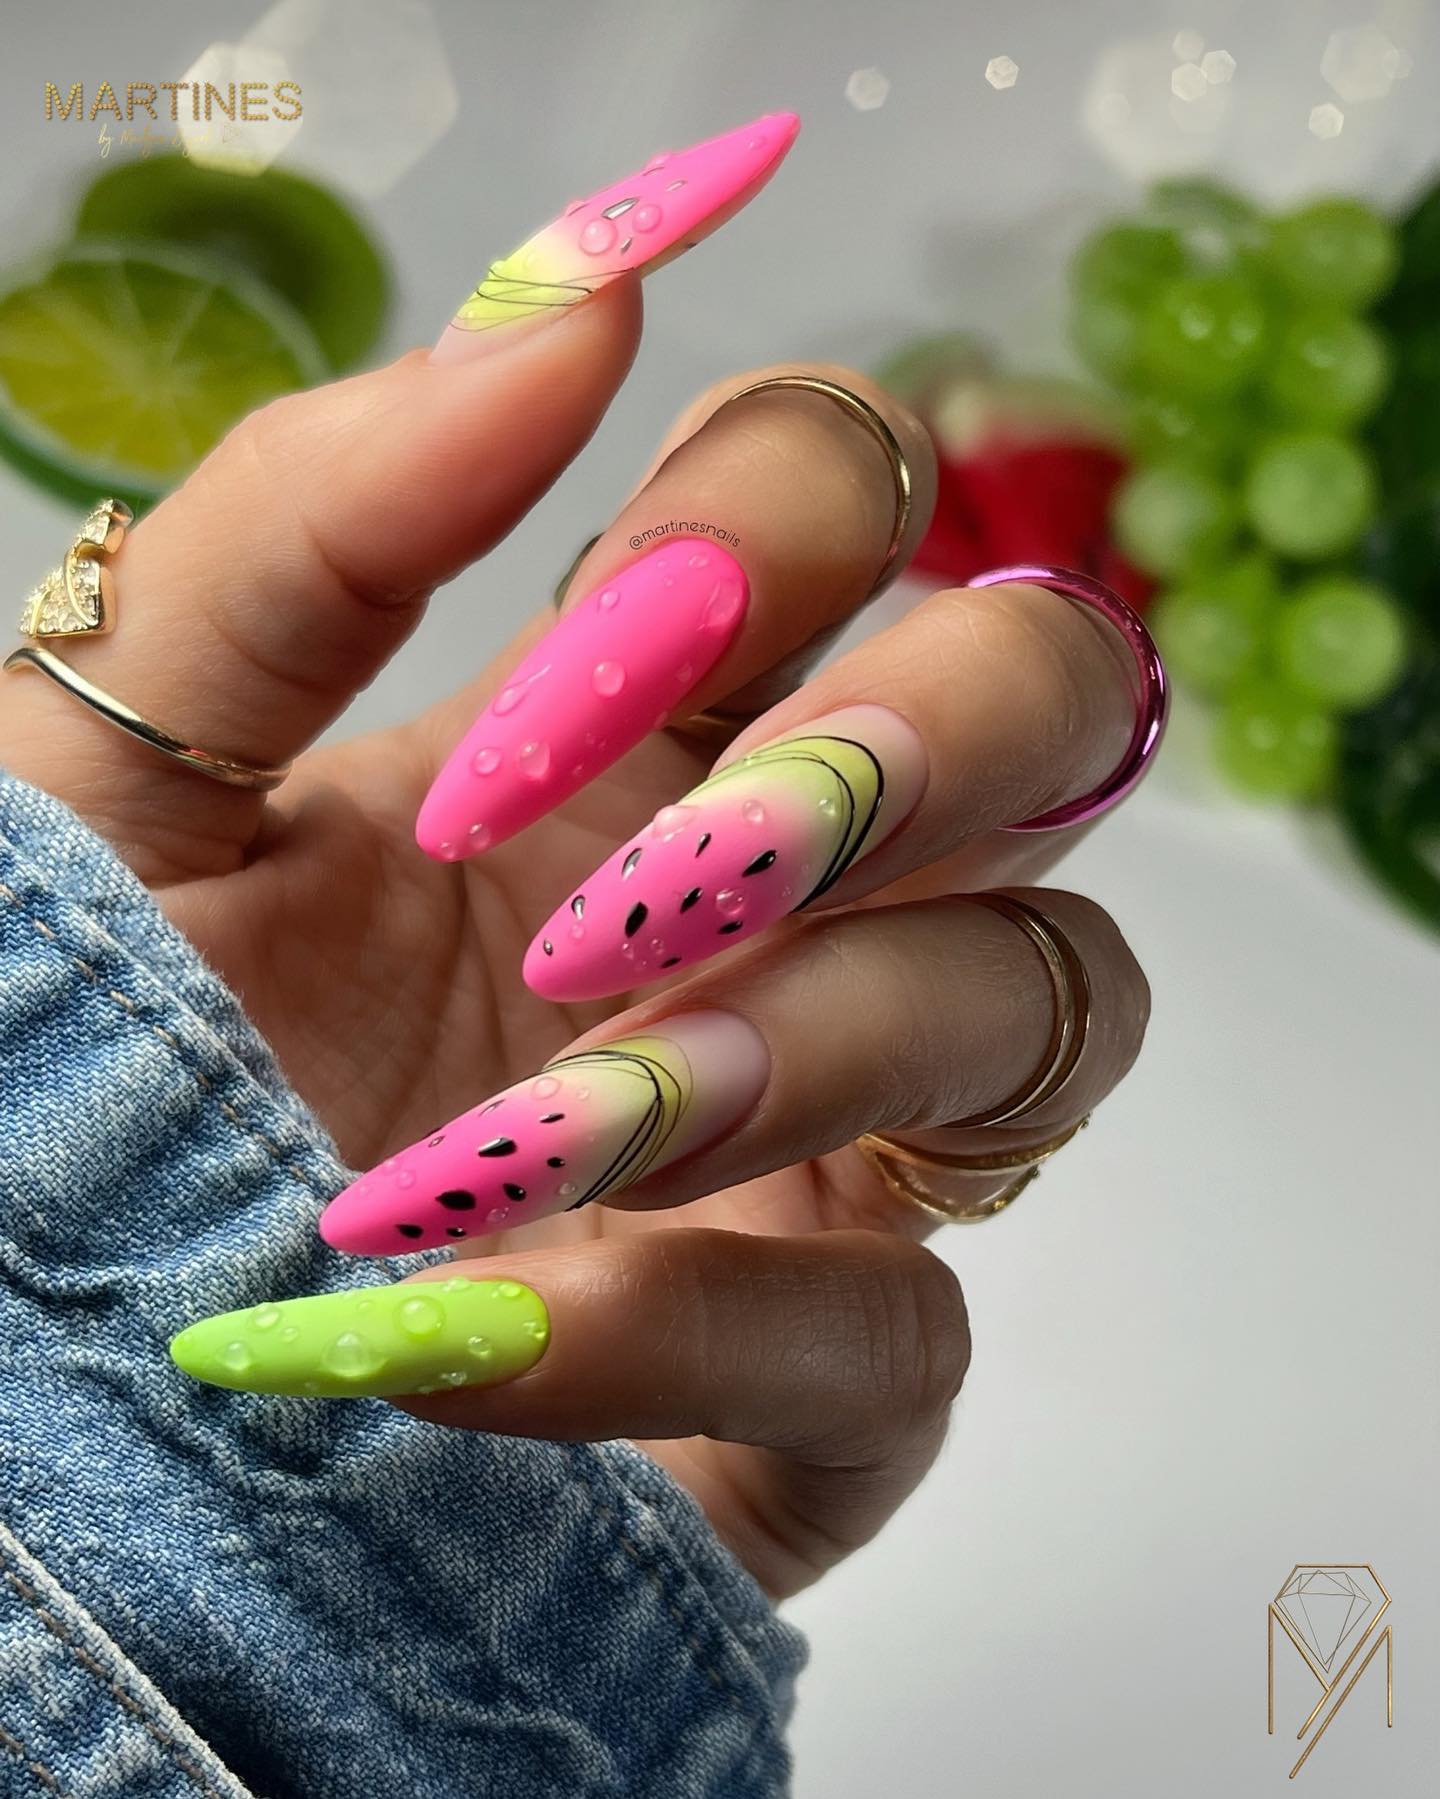 Find inspiration for your nails by looking at a watermelon! This cool artsy design is for those who wish to wear something new and different.